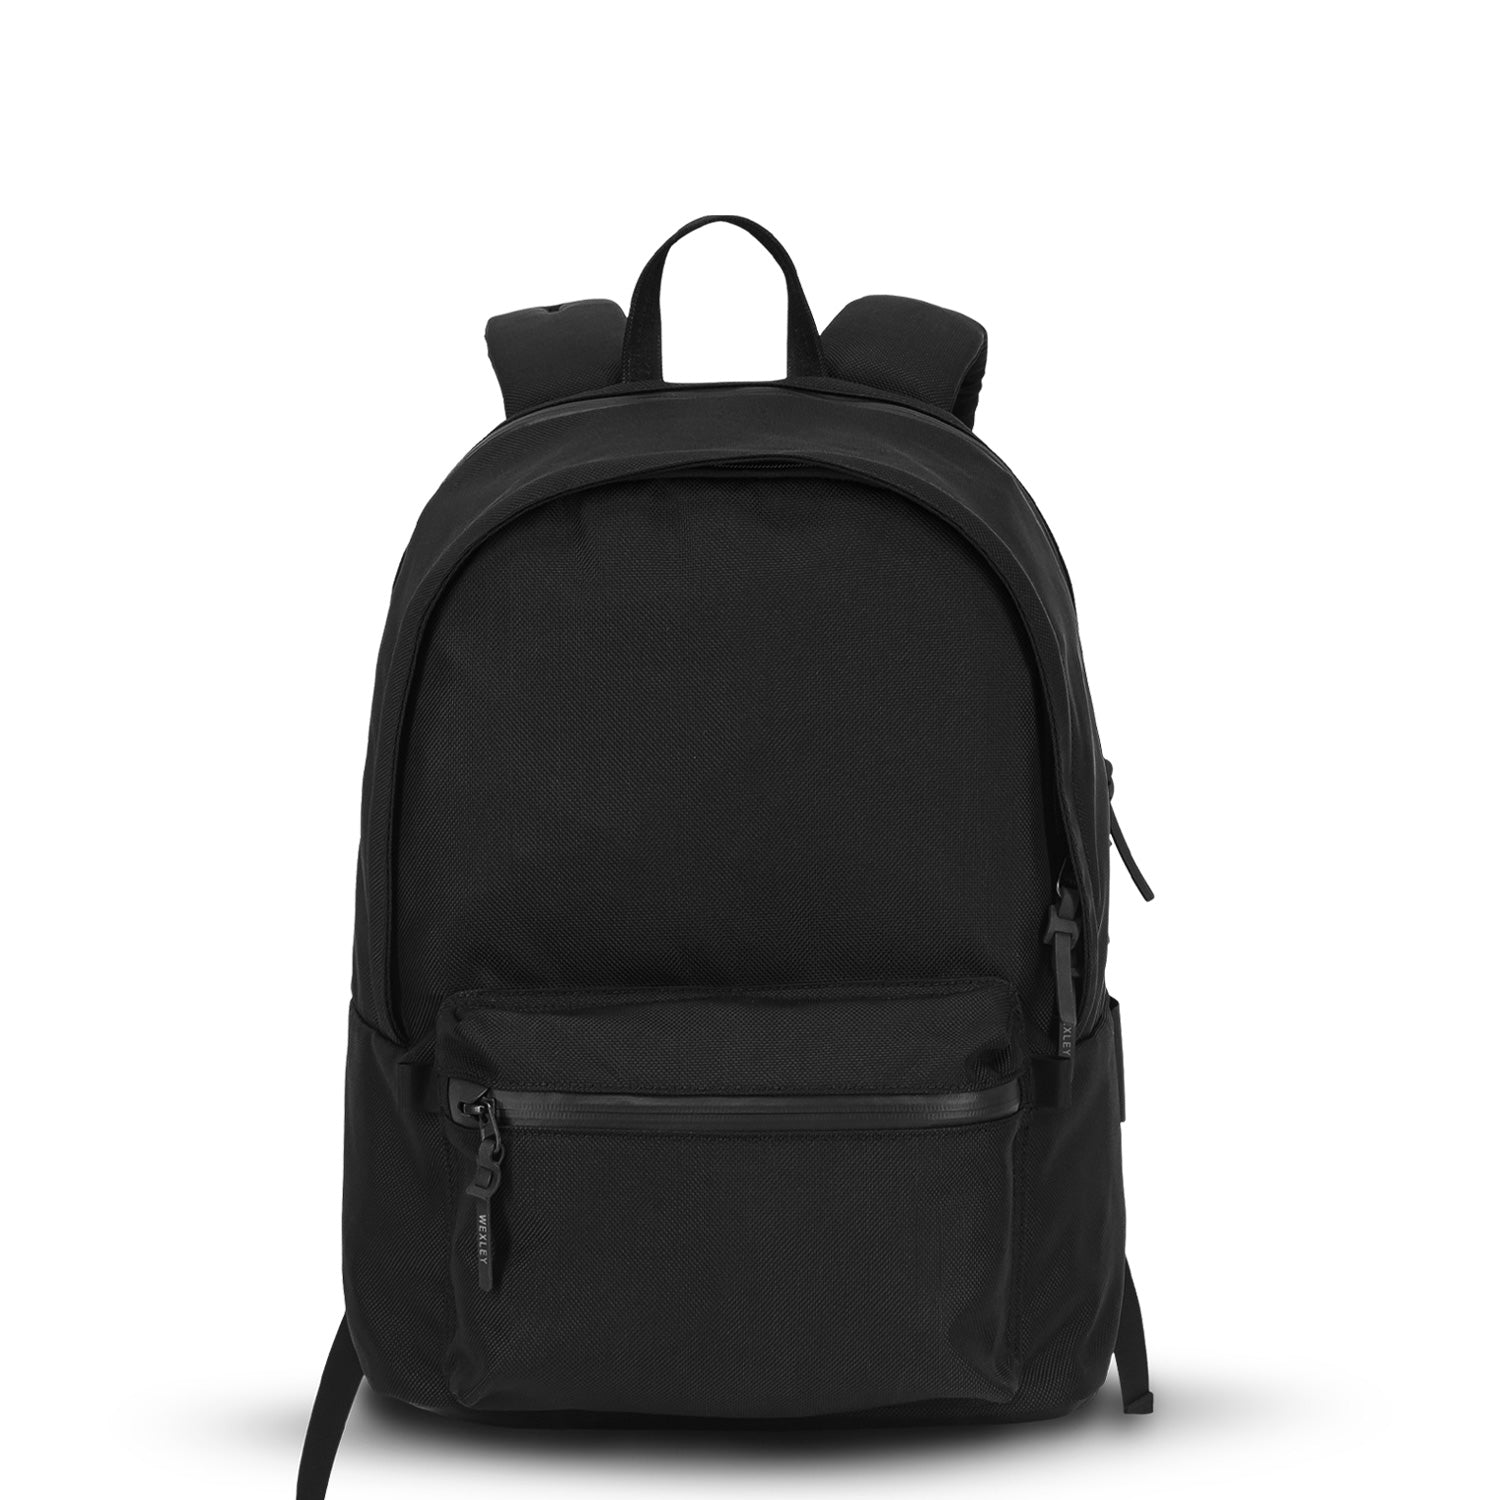 CLASSIC | THE ICONIC DAYPACK